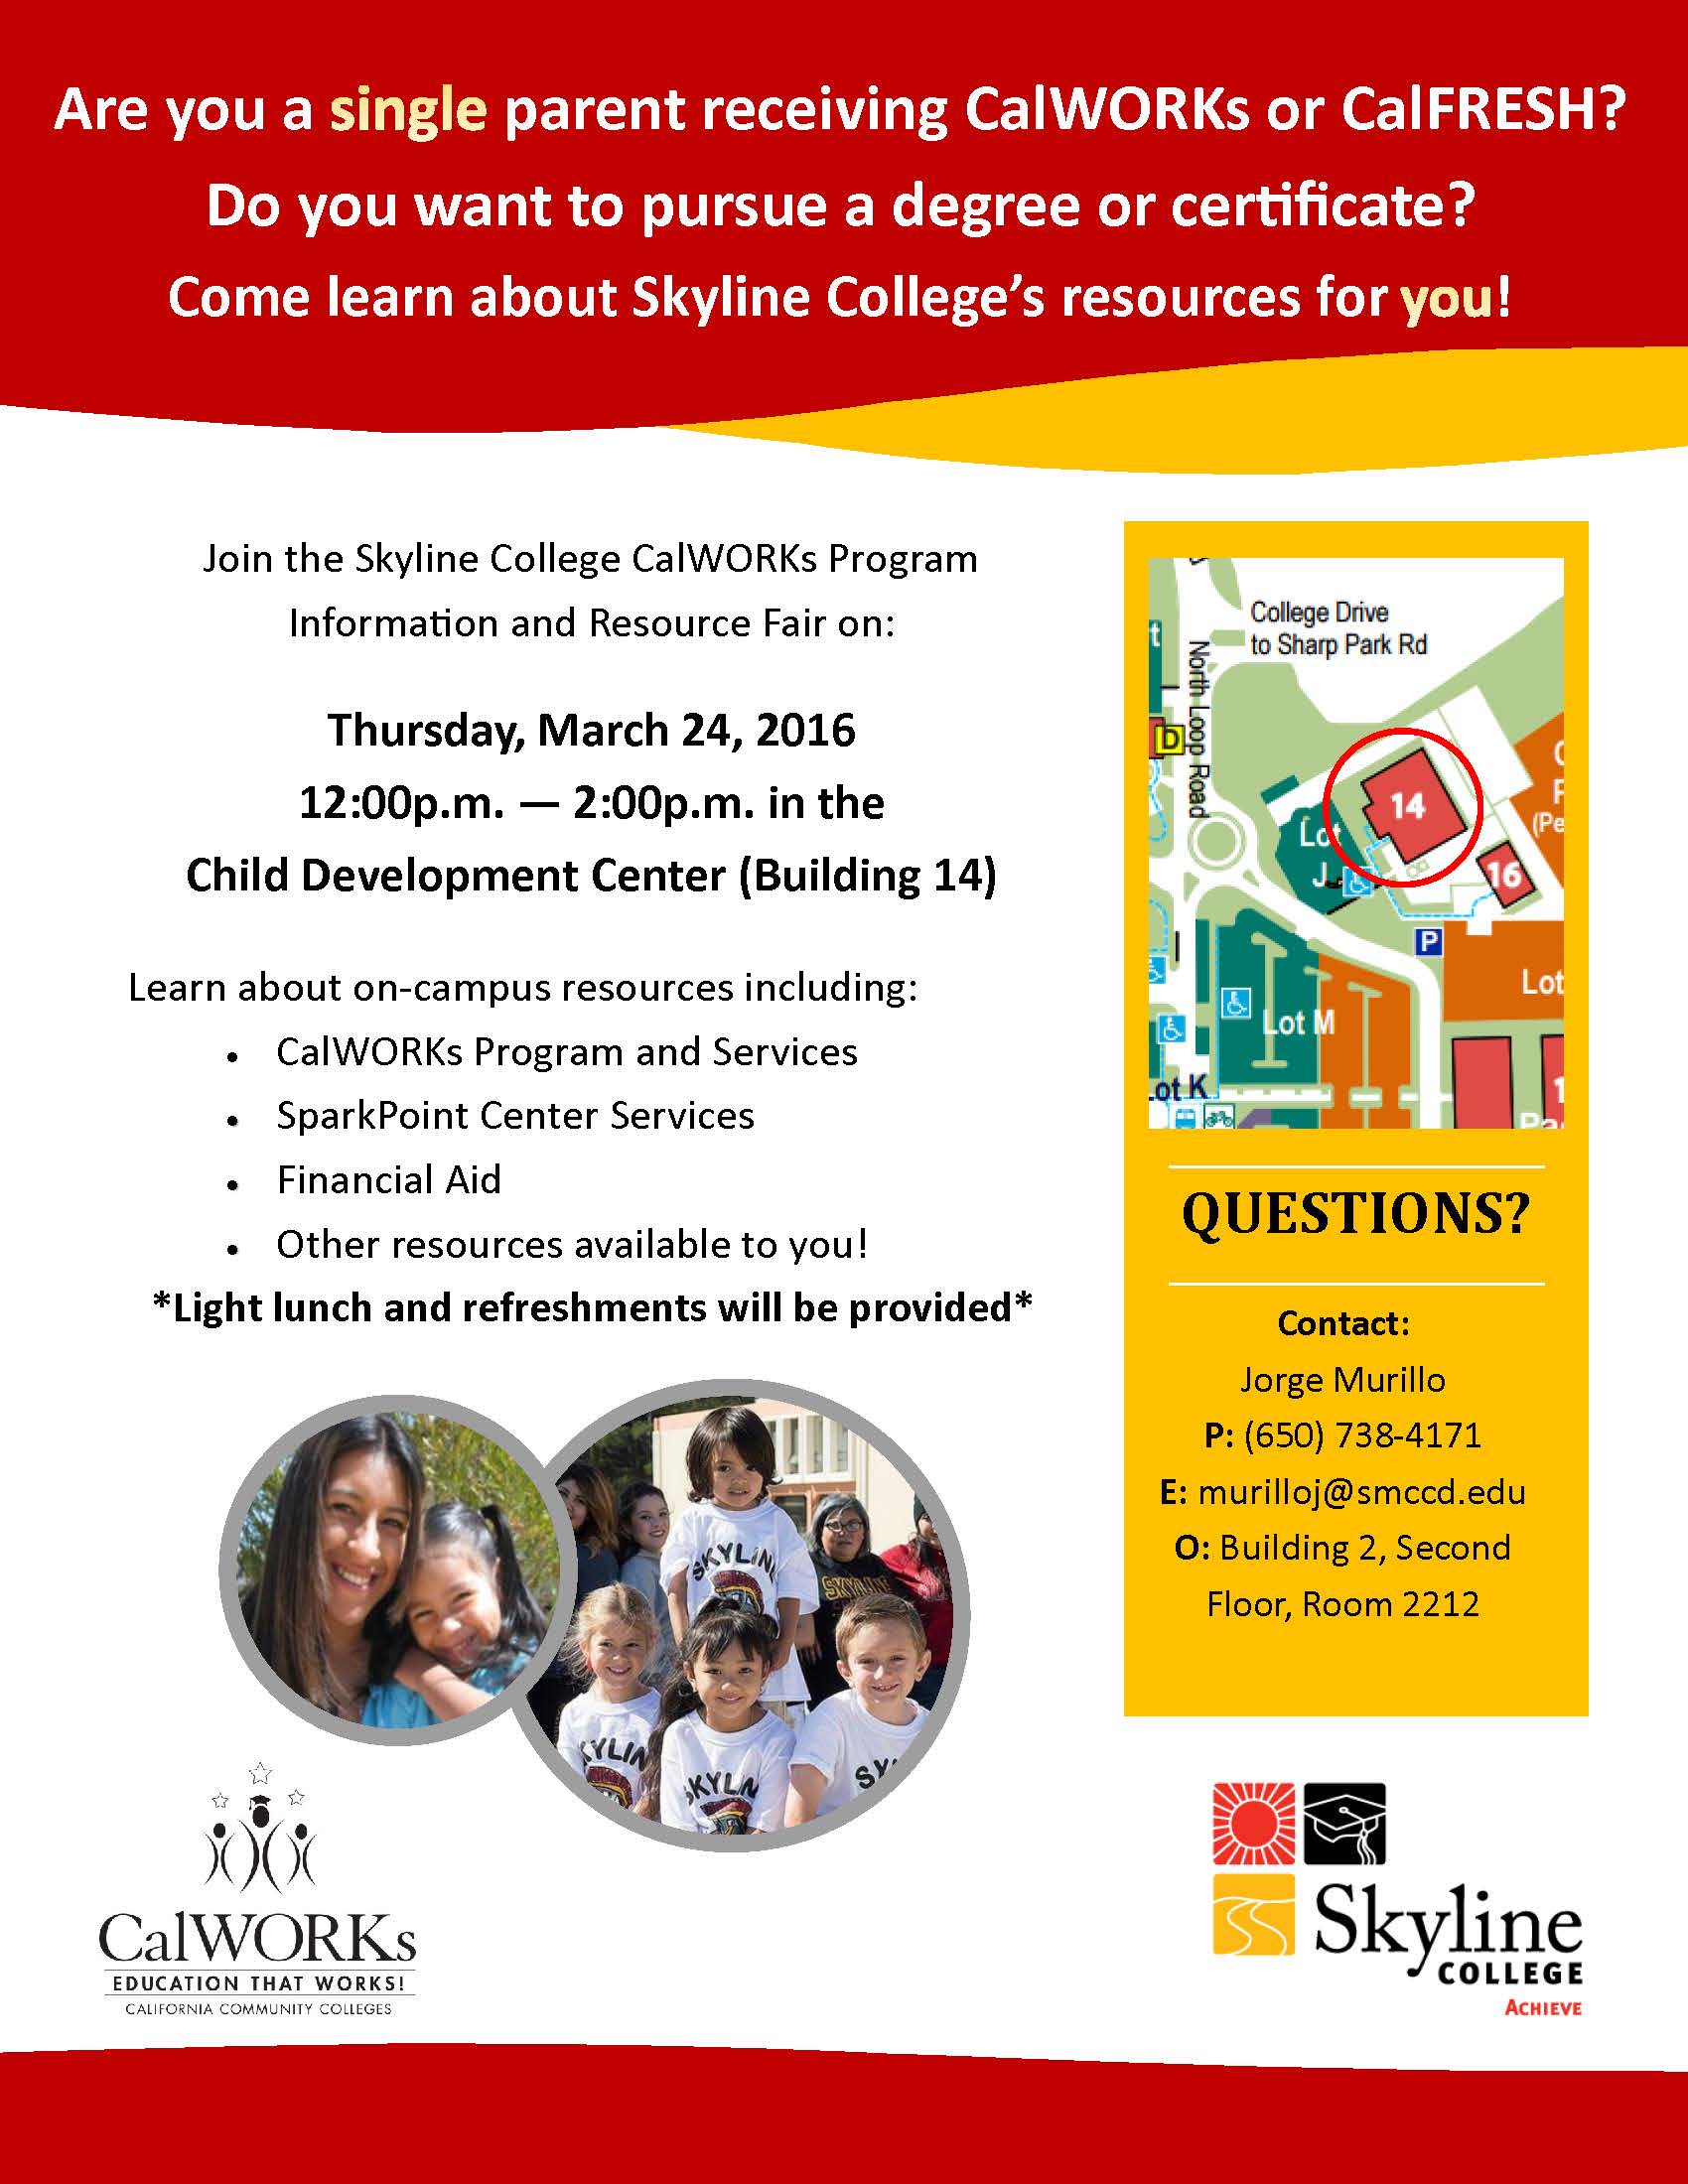 Skyline College Presents a FREE Resource Event for Single ...